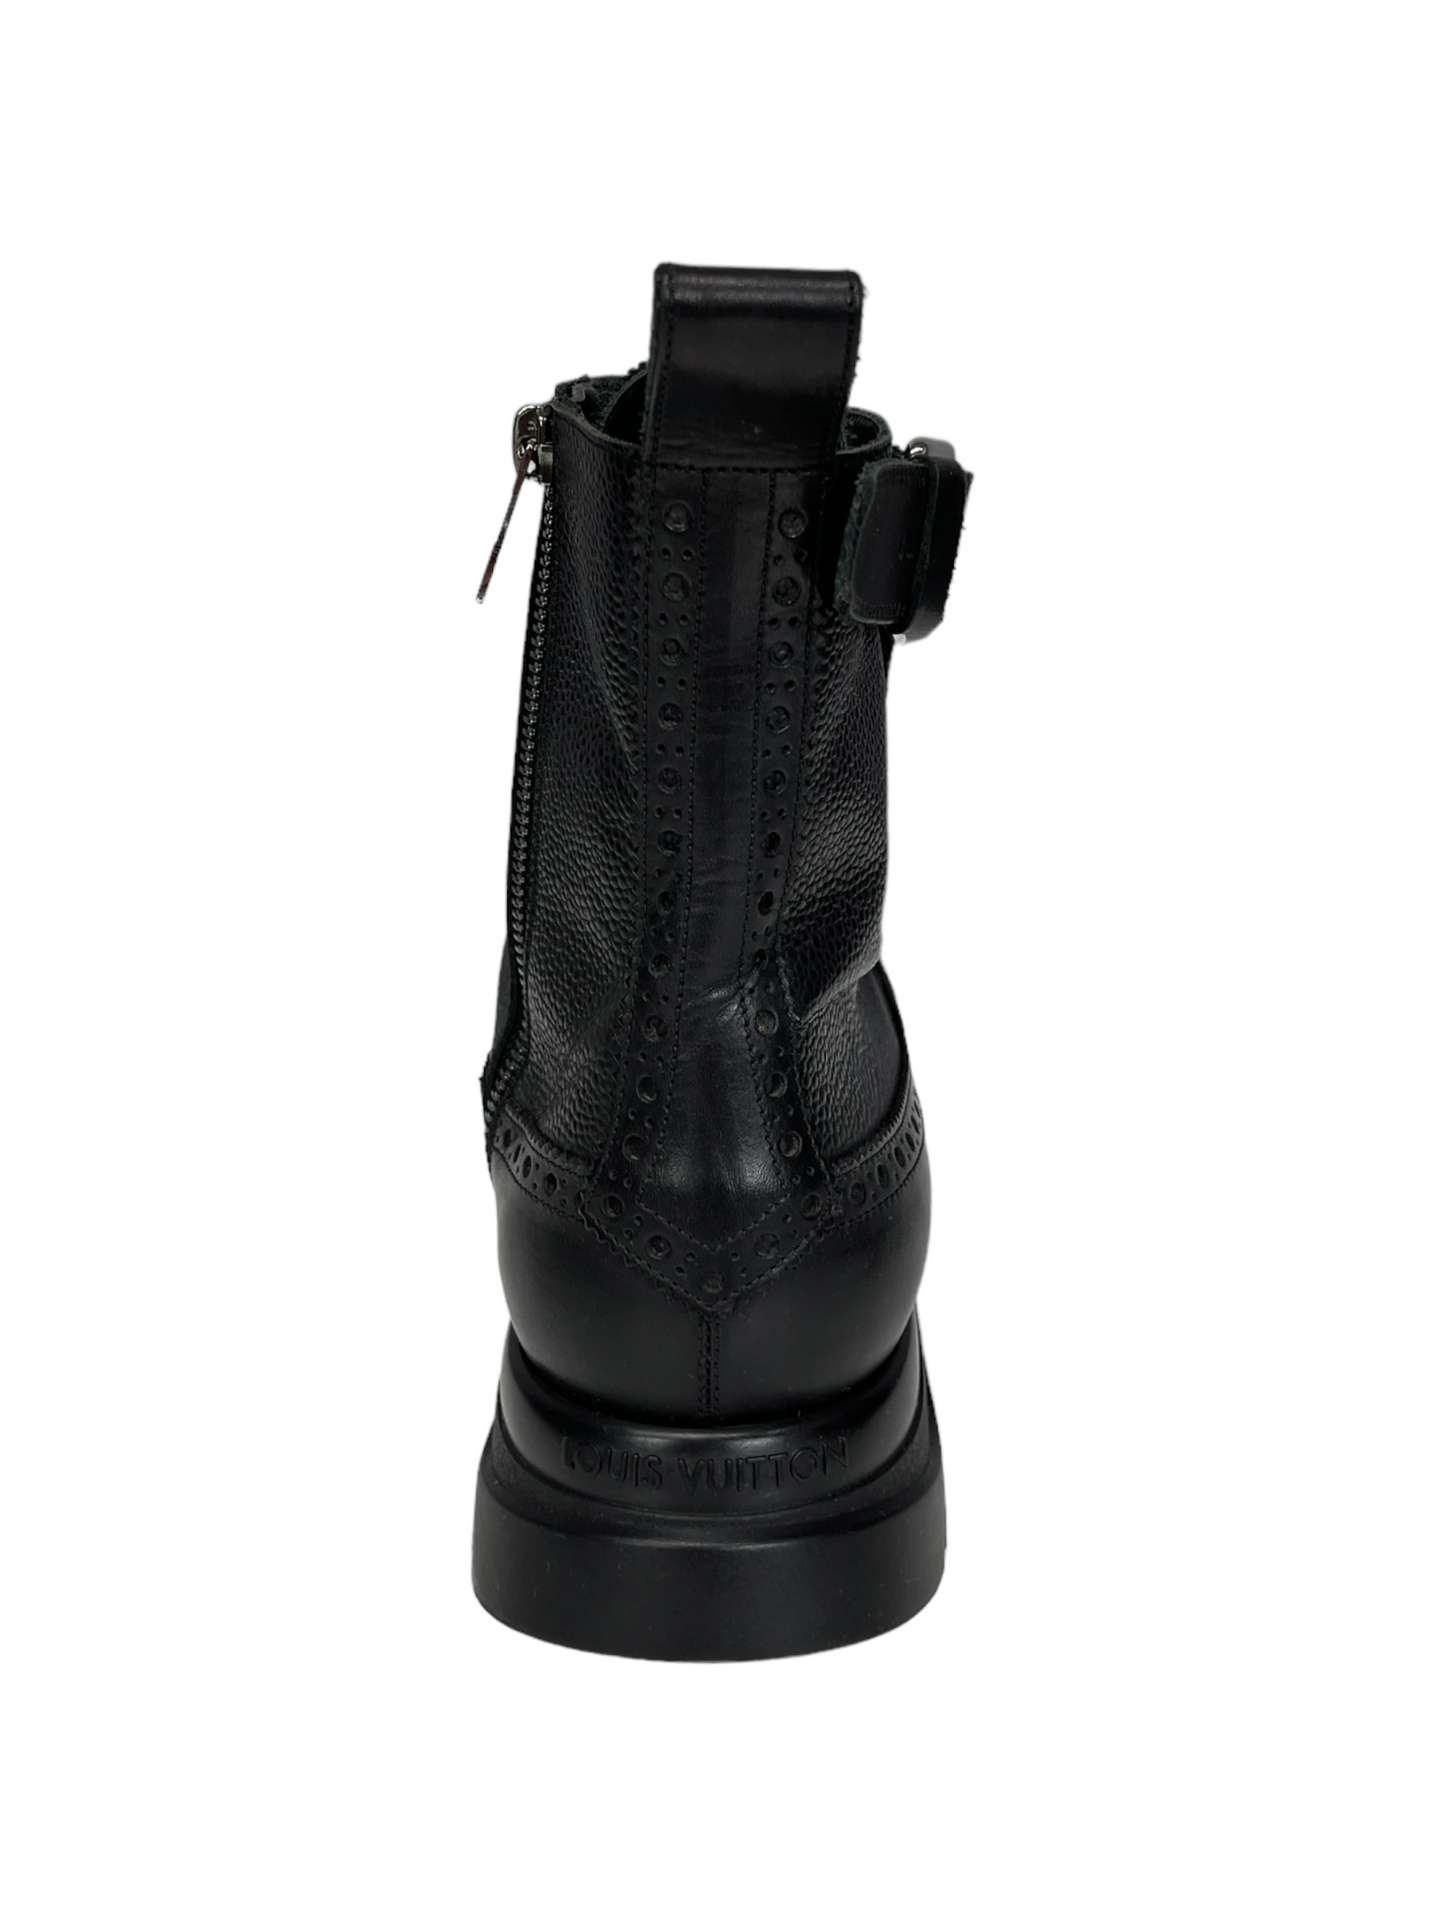 Louis Vuitton Black High Platform Military Style Boot 7.5 US- Genuine Design Luxury Consignment Calgary, Alberta, Canada New and Pre-Owned Clothing, Shoes, Accessories.